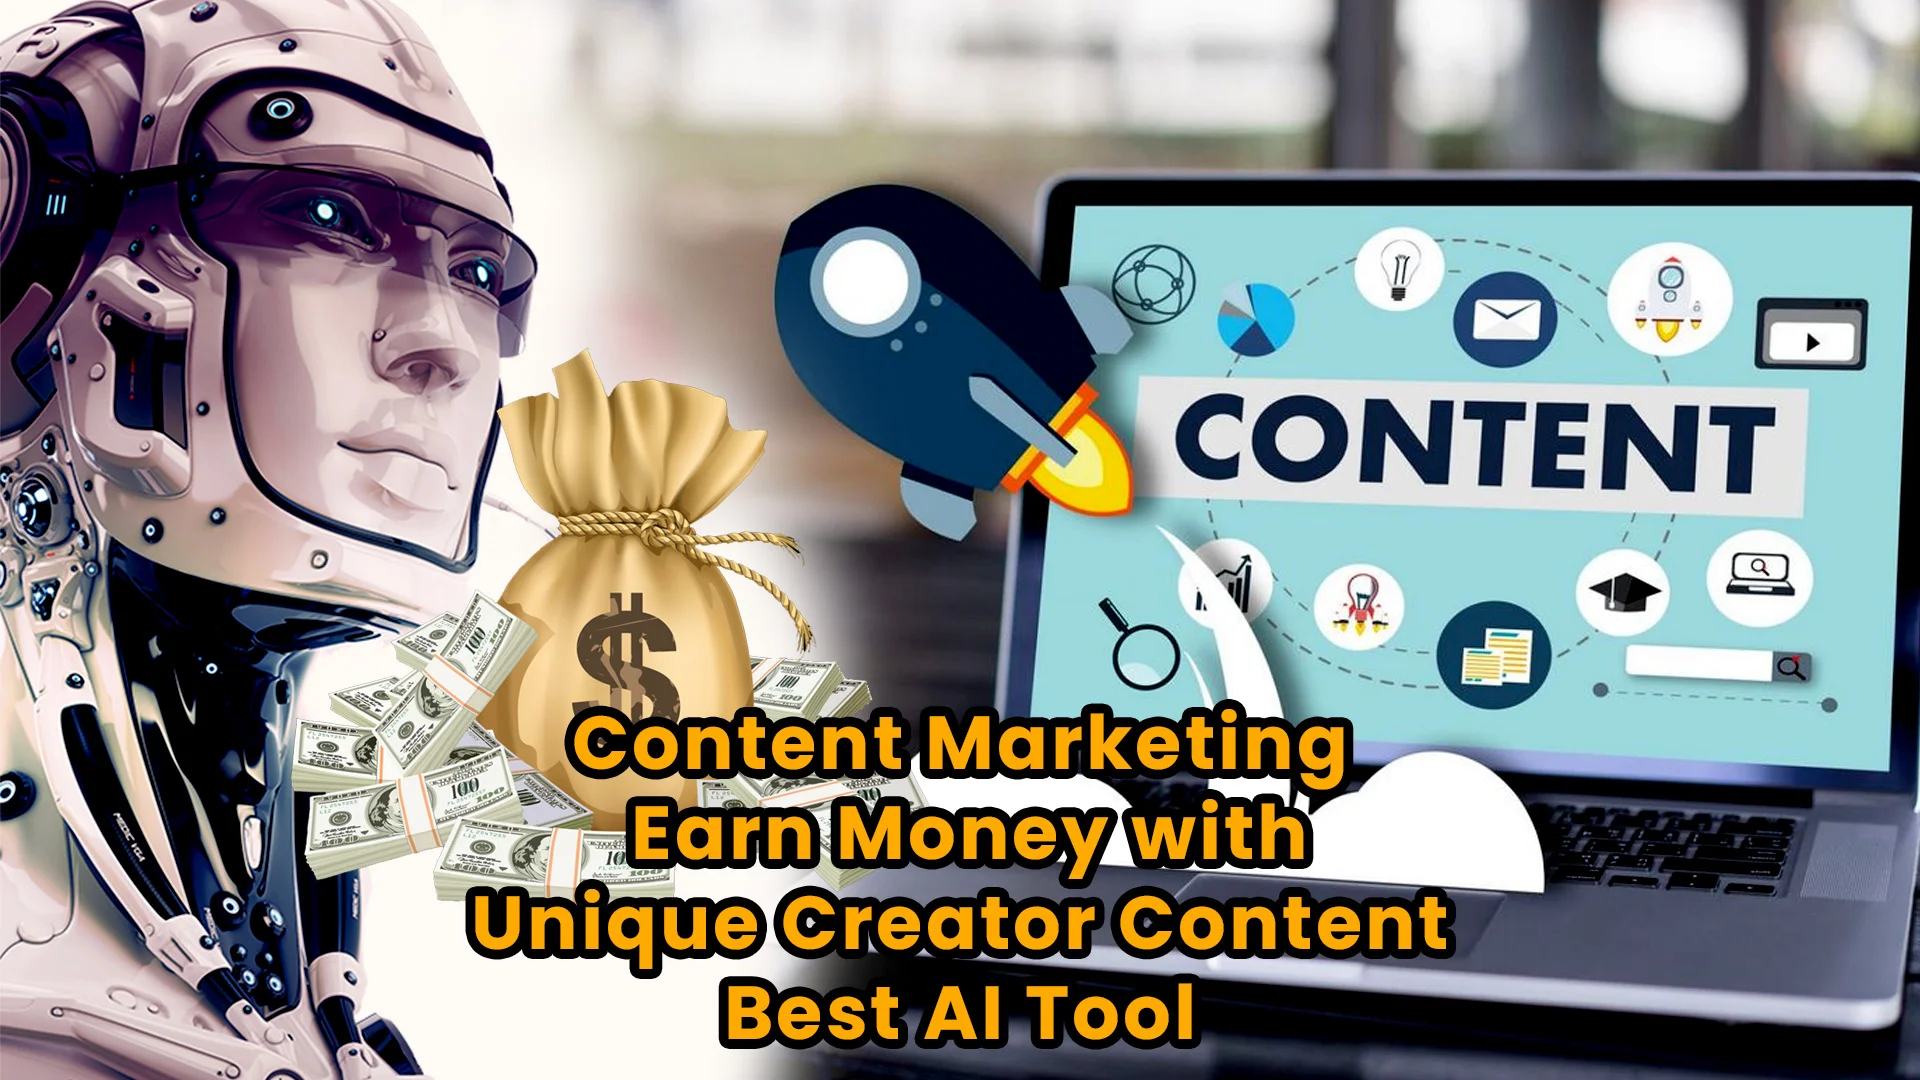 AI Content marketing Tools, Boost Your Income with Intelligent Automation